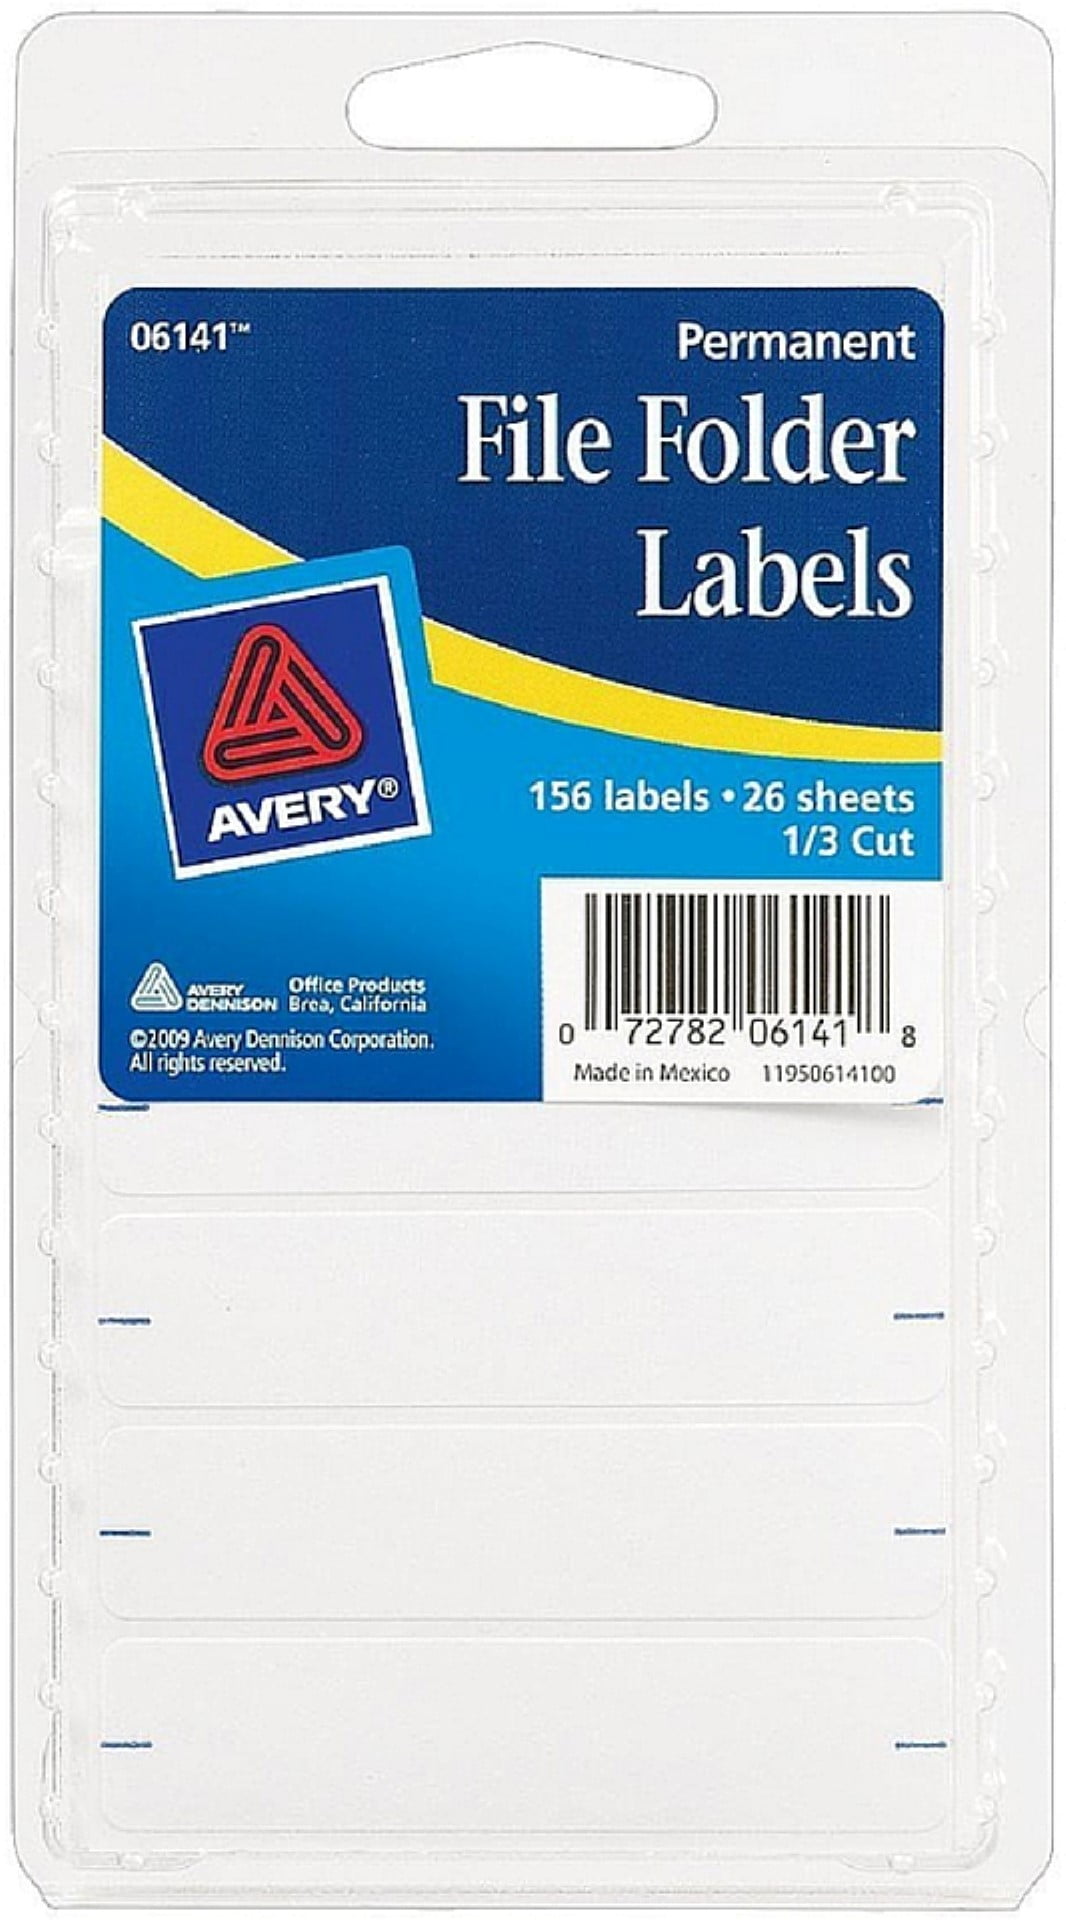 White 156 ea Pack of 2 Avery Permanent File Folder Labels 2.75 x 0.625 Inches 